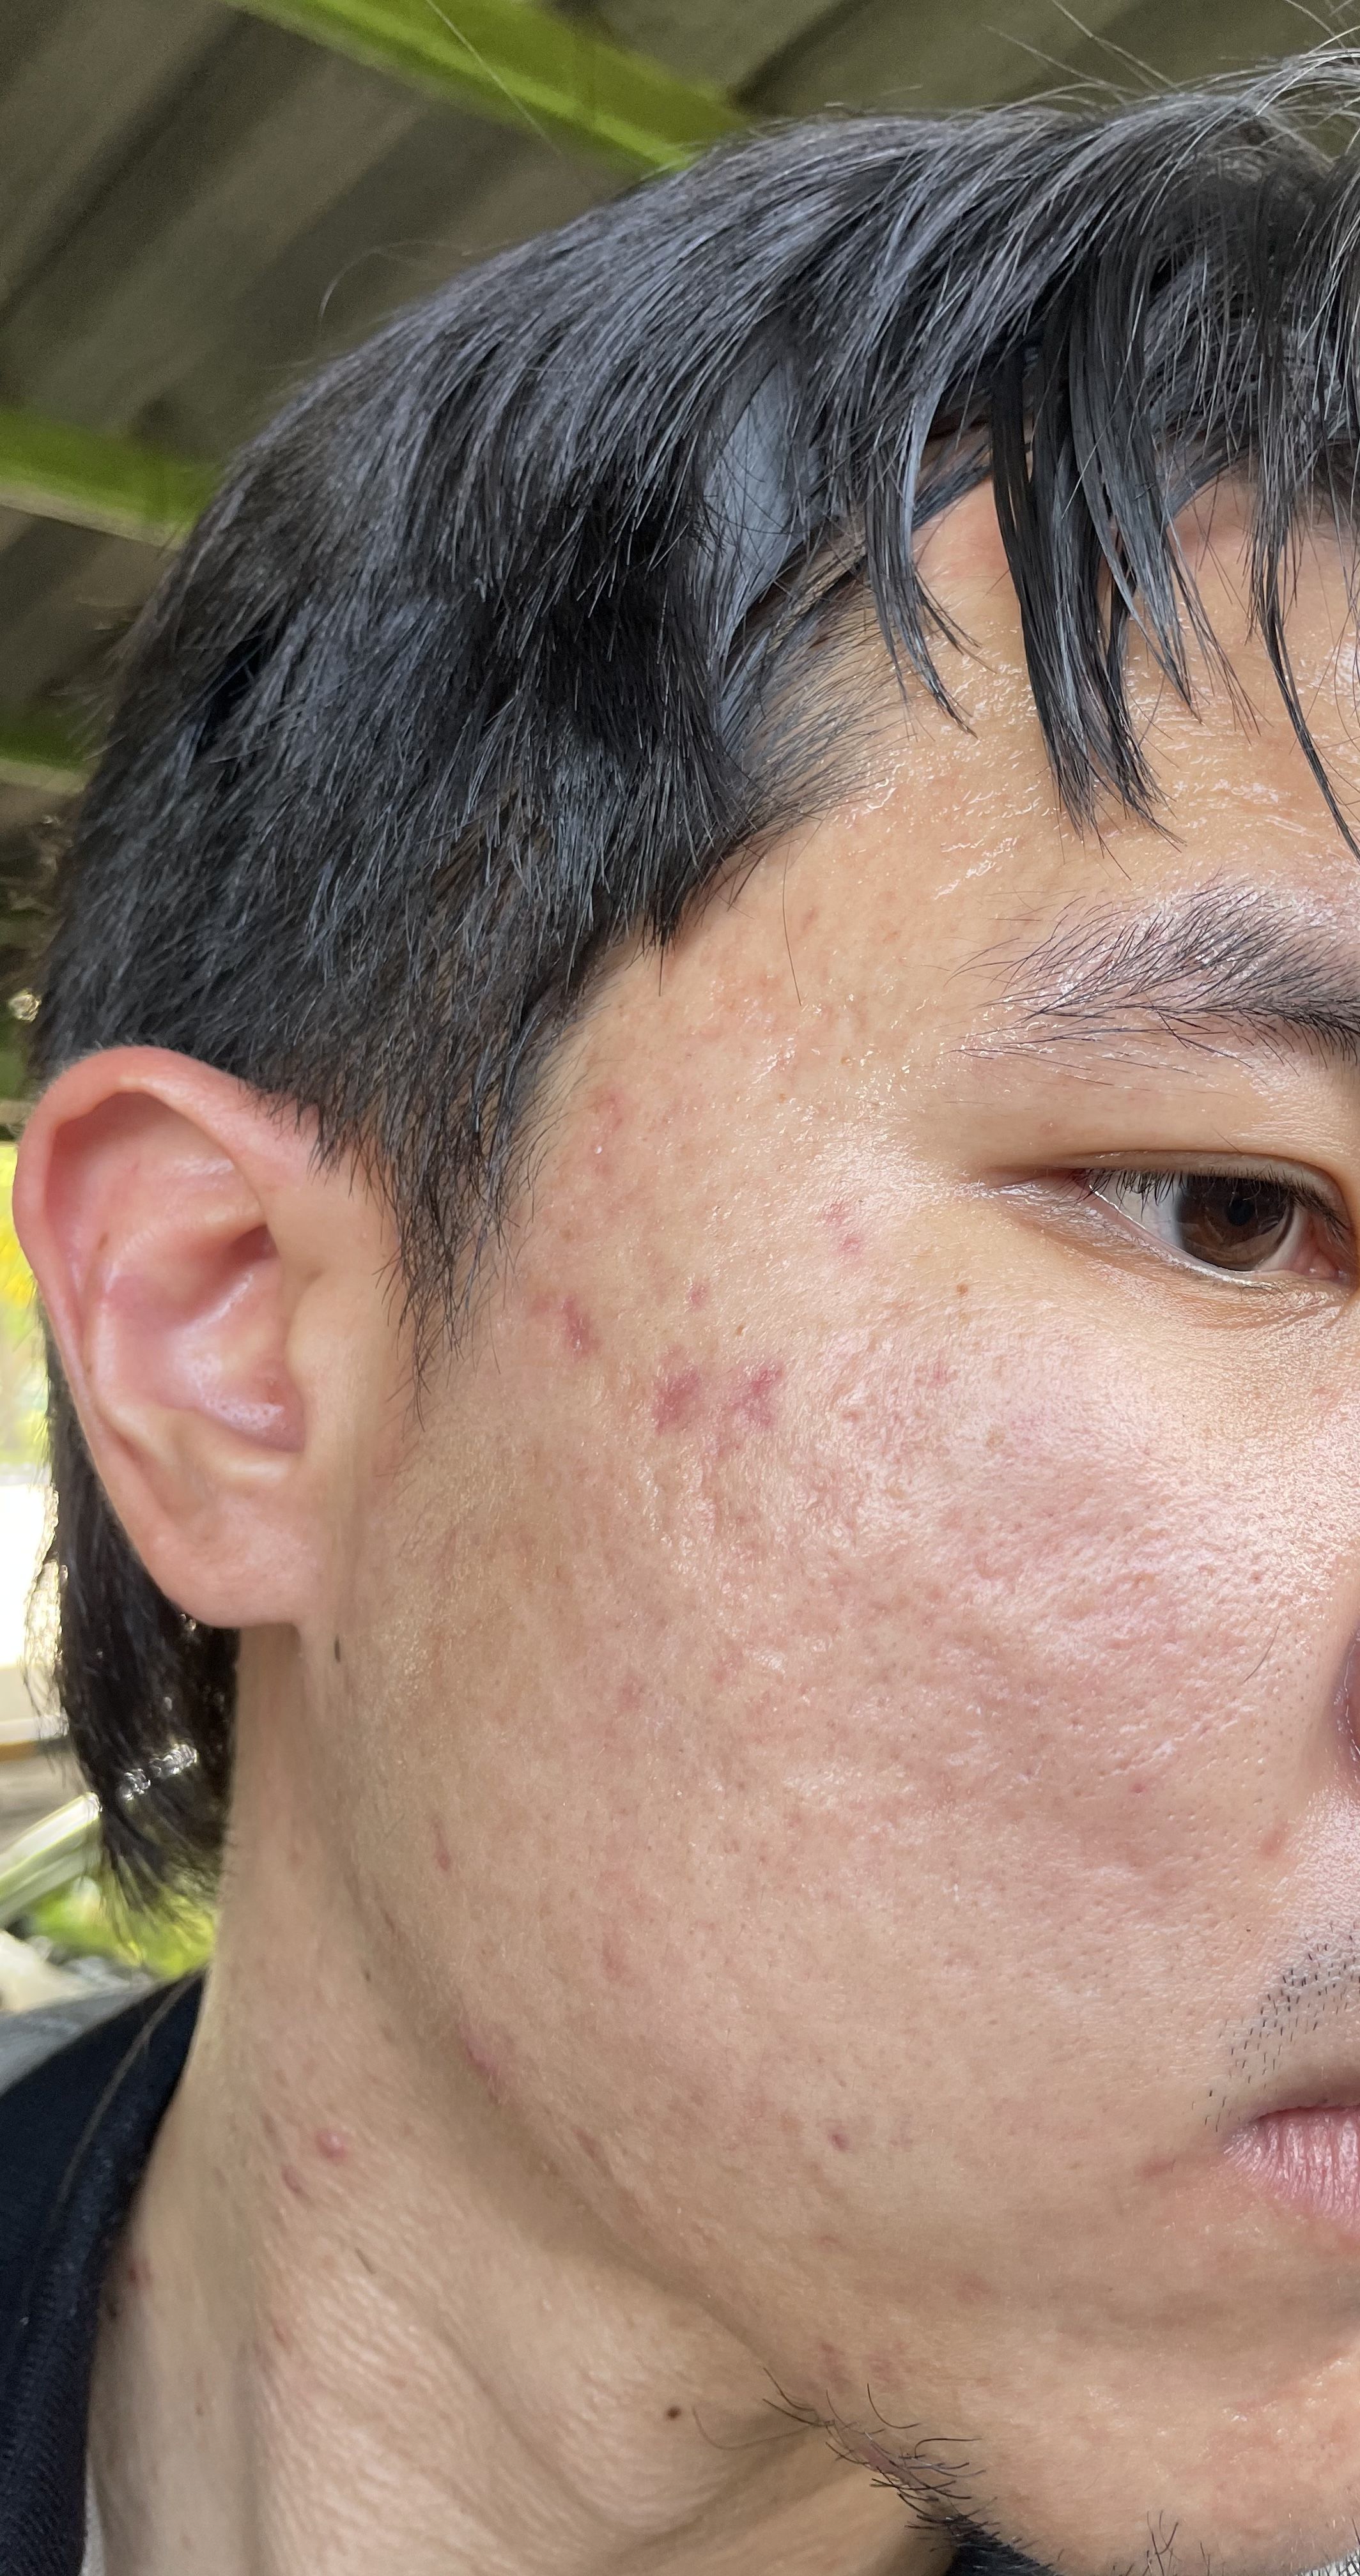 What Is The Best Treatment For My Severe Acne Scars After Finishing Or While Taking Accutane